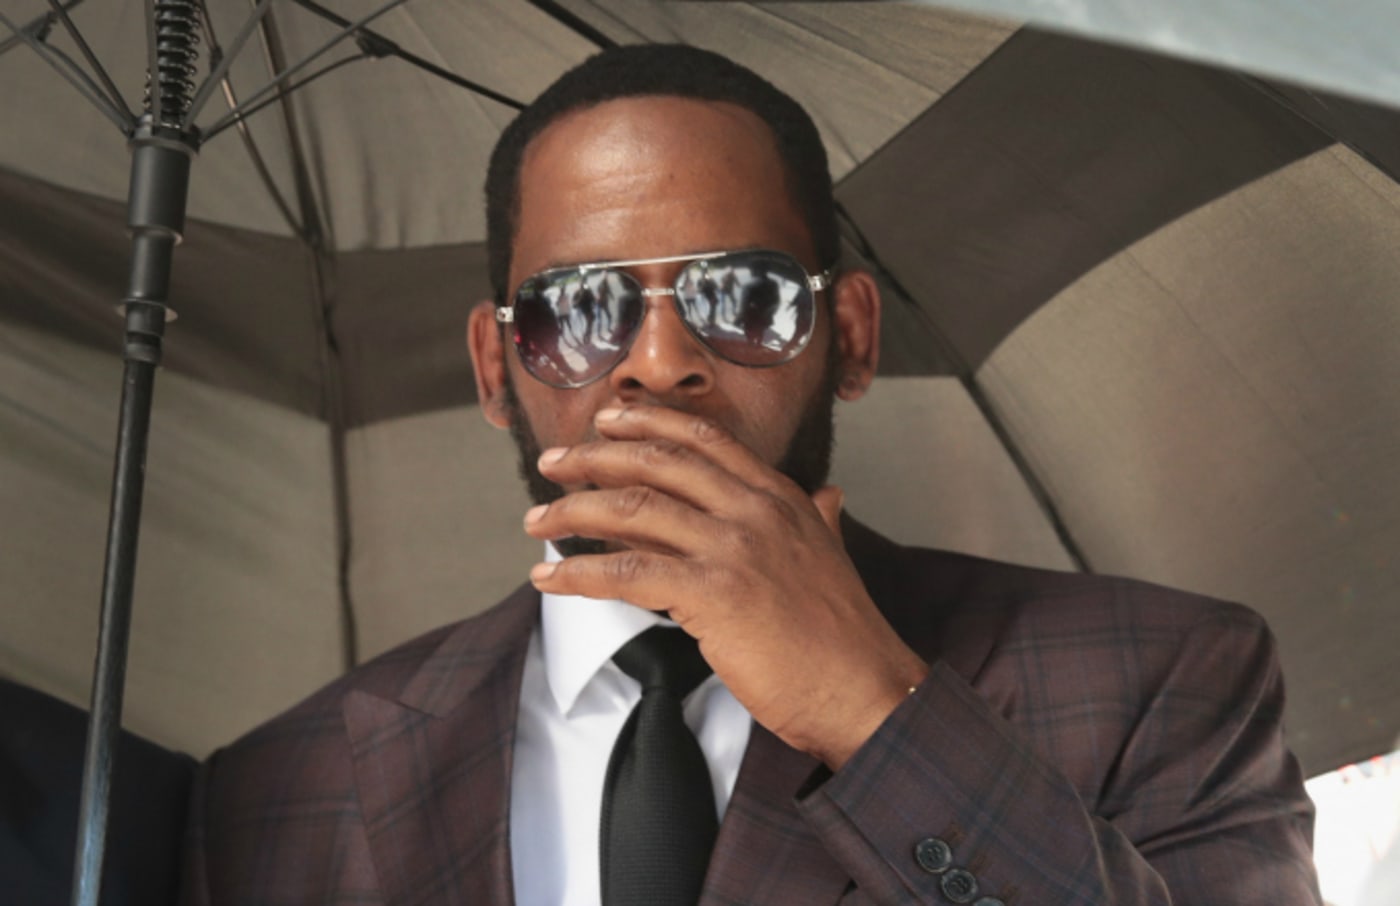 R&B singer R. Kelly covers his mouth